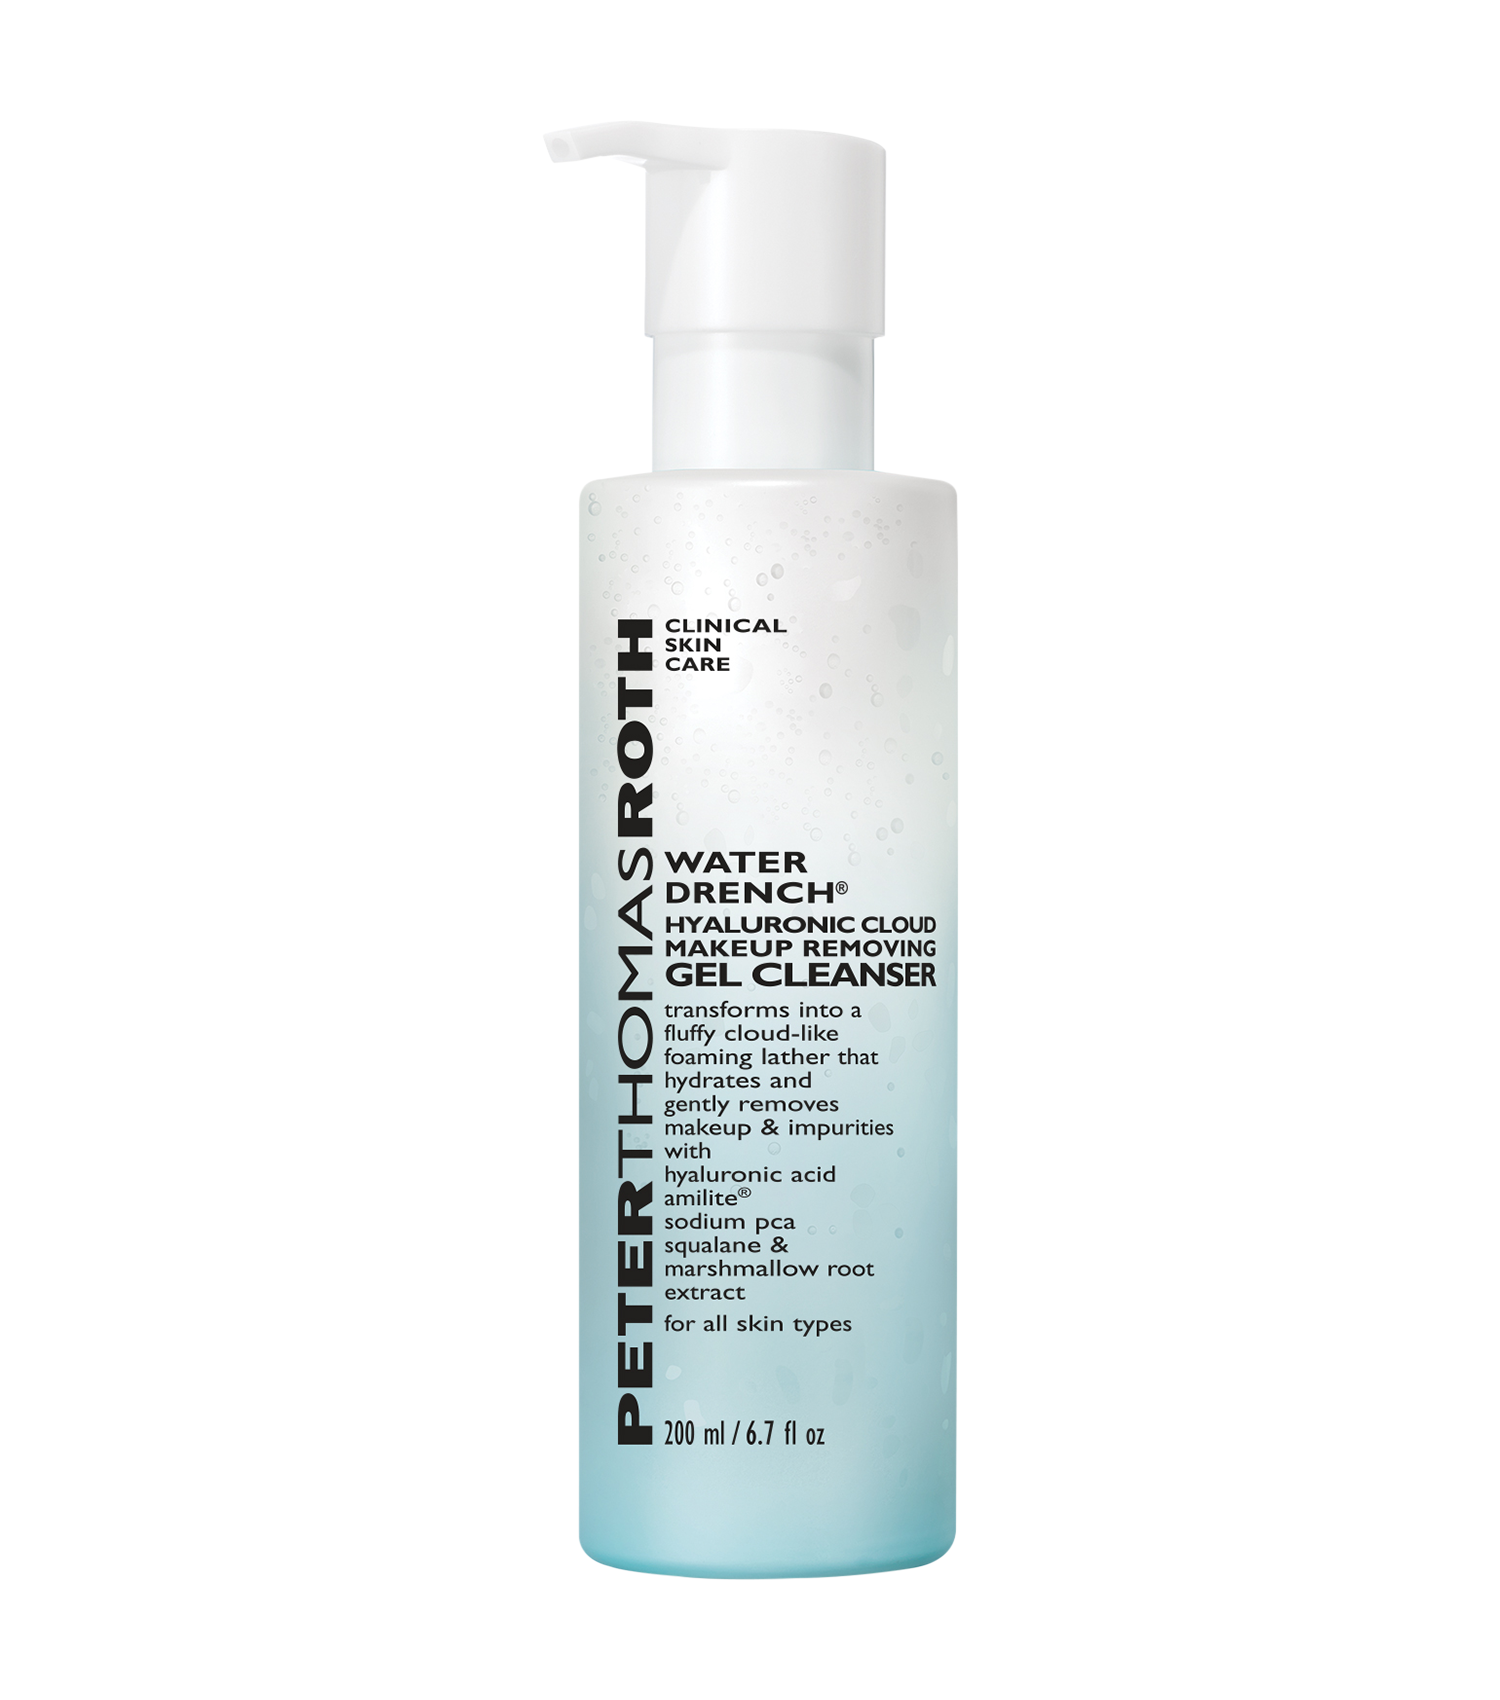 PETER THOMAS ROTH Water Drench Hyaluronic Cloud Makeup Removing Gel Cleanser